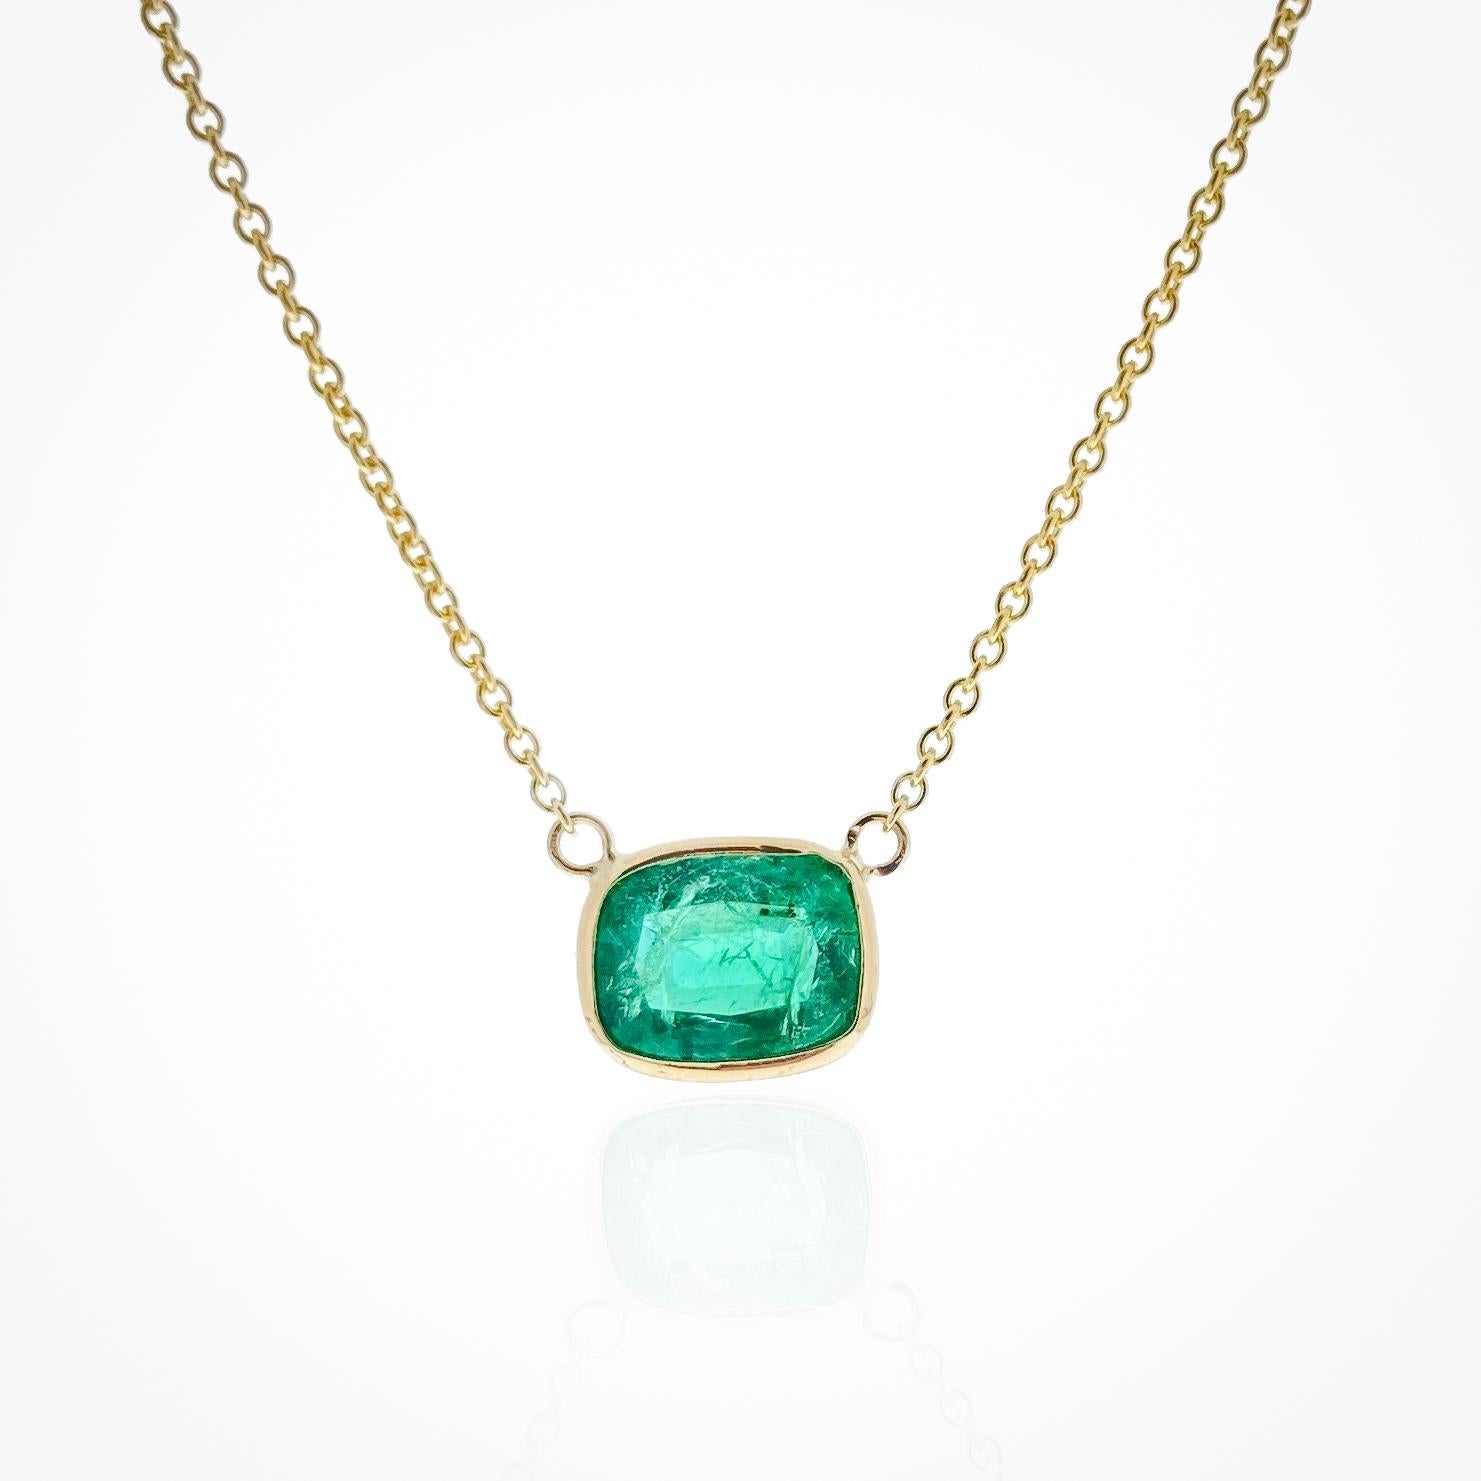 This necklace features a cushion-cut green emerald with a weight of 1.96 carats, set in 14k yellow gold (YG). Emeralds are highly prized for their rich green color, and the cushion cut is known for its timeless and elegant appearance, characterized